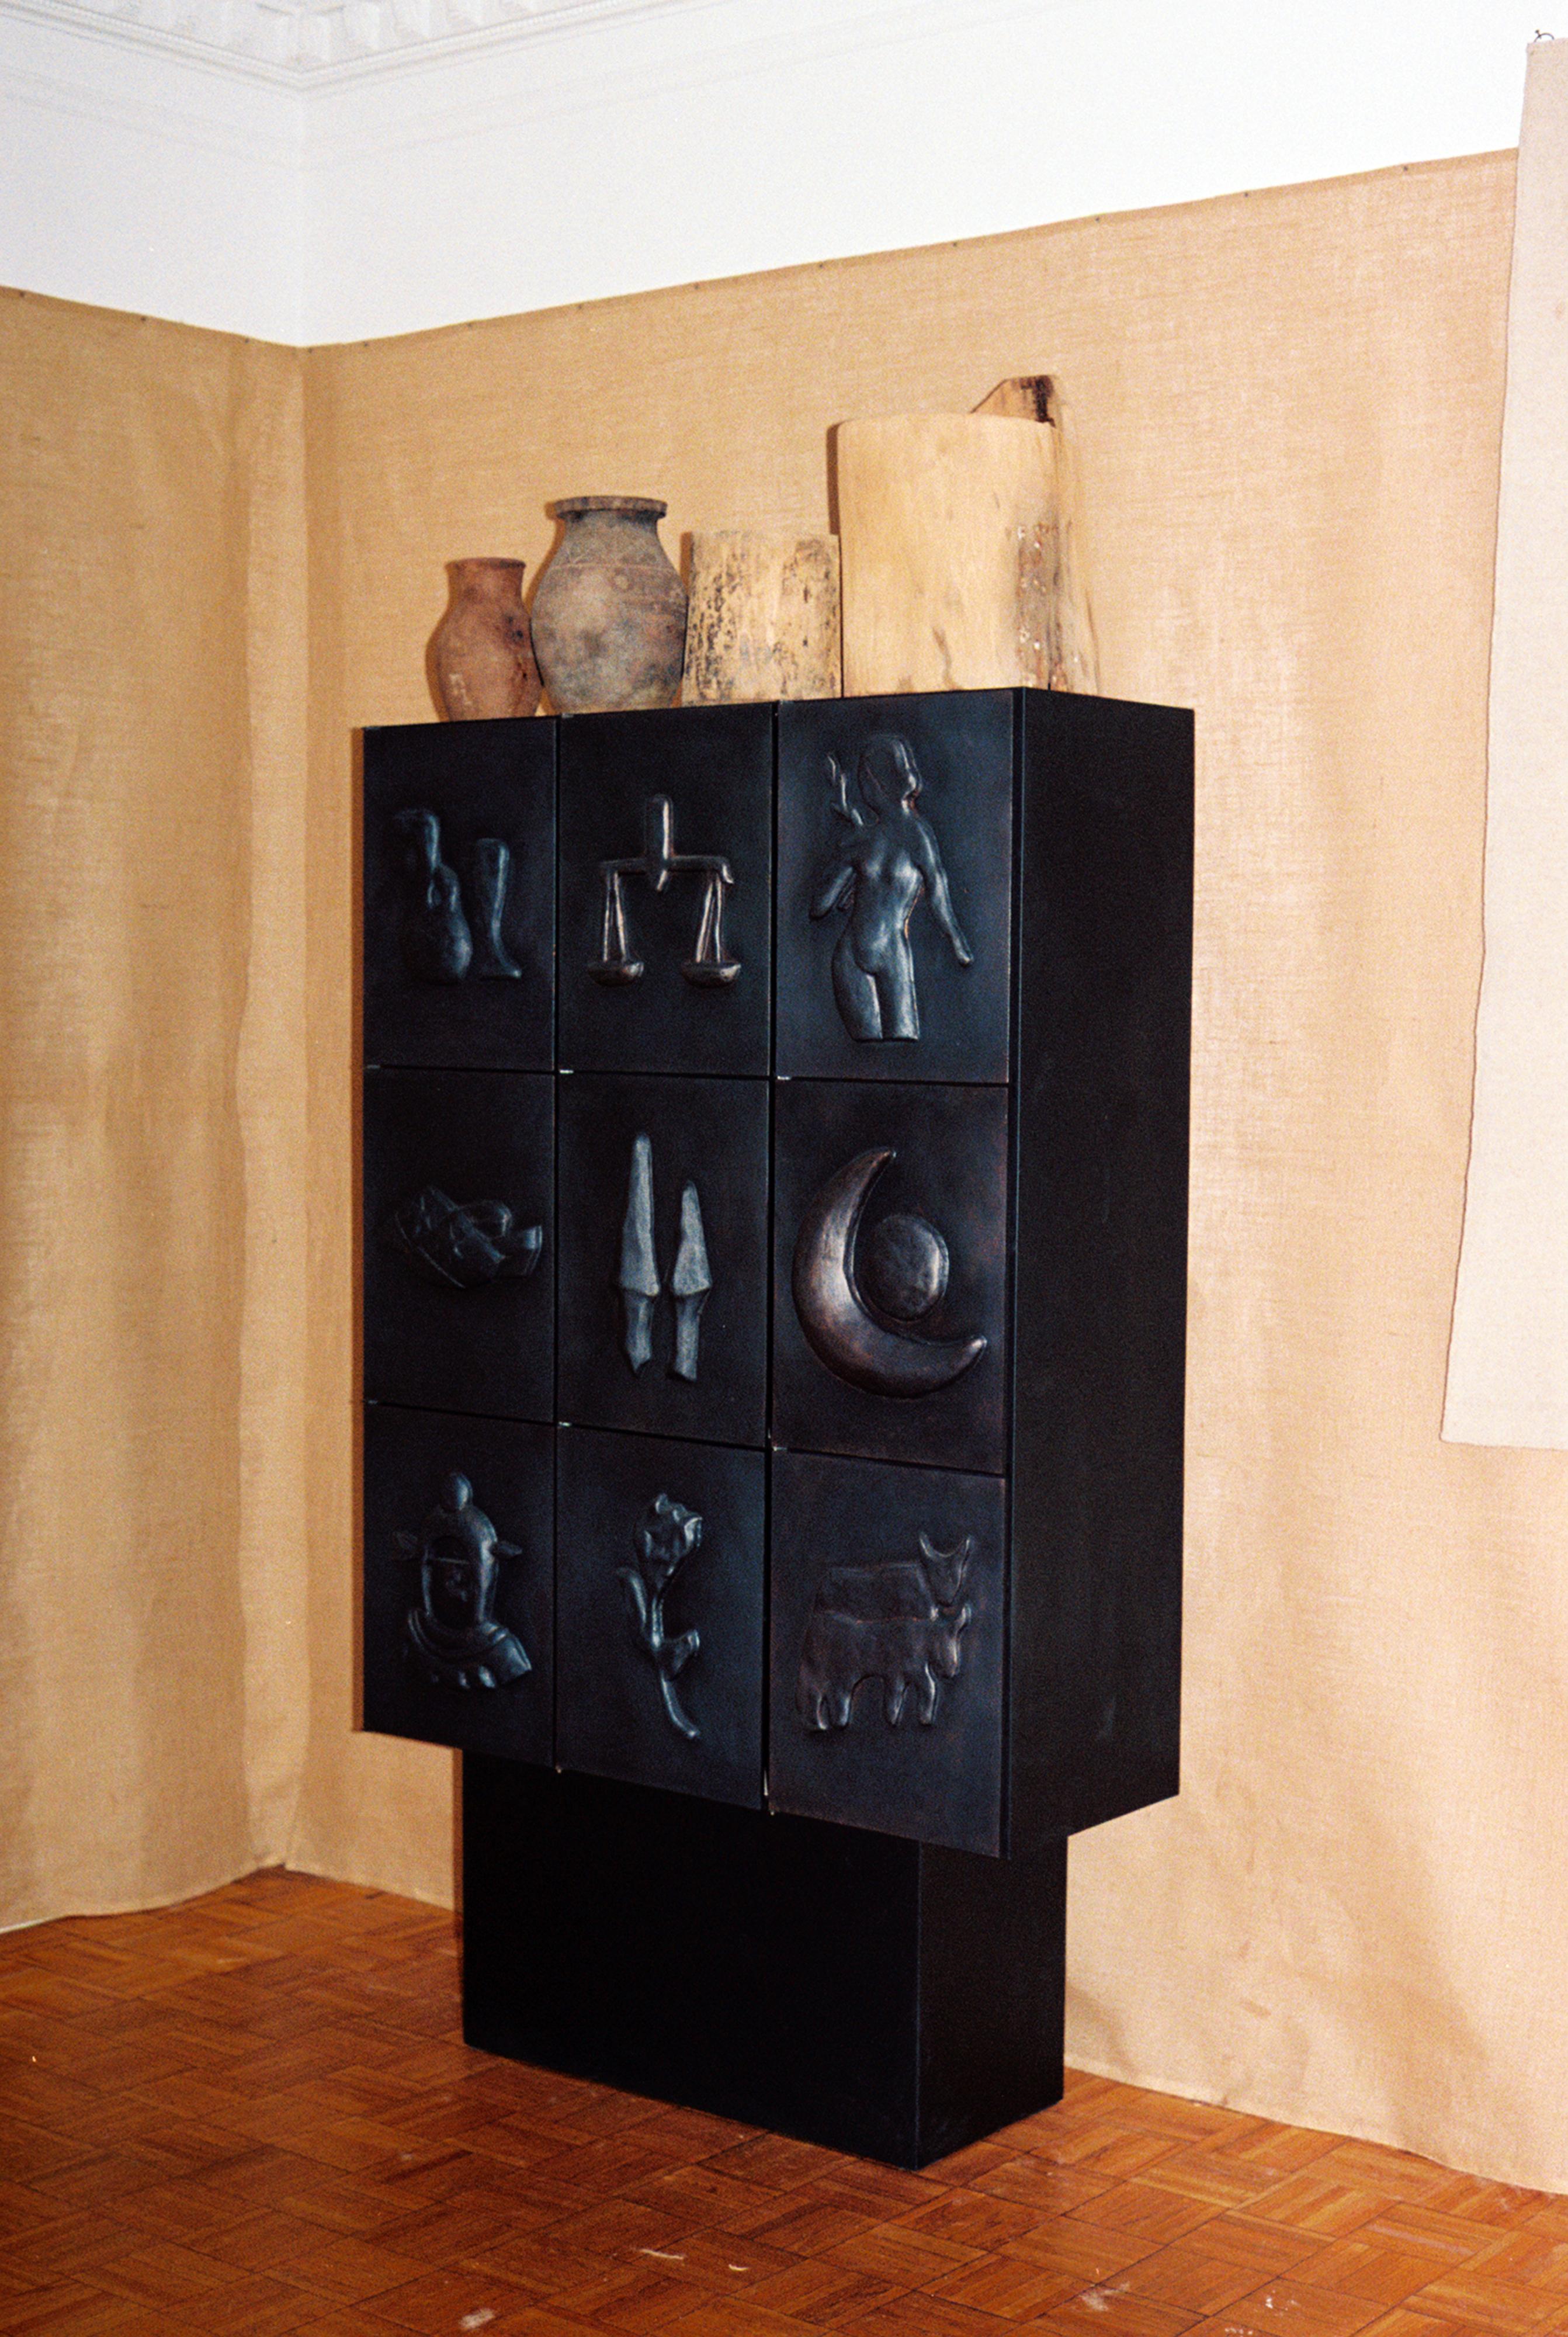 This elegant and  wood, metal, and copper cabinet adorned with blackened copper low-relief motifs is created with expert construction by the design duo Rooms Studio from Tbilisi, Georgia. Each door of the handmade black metal cabinet features a